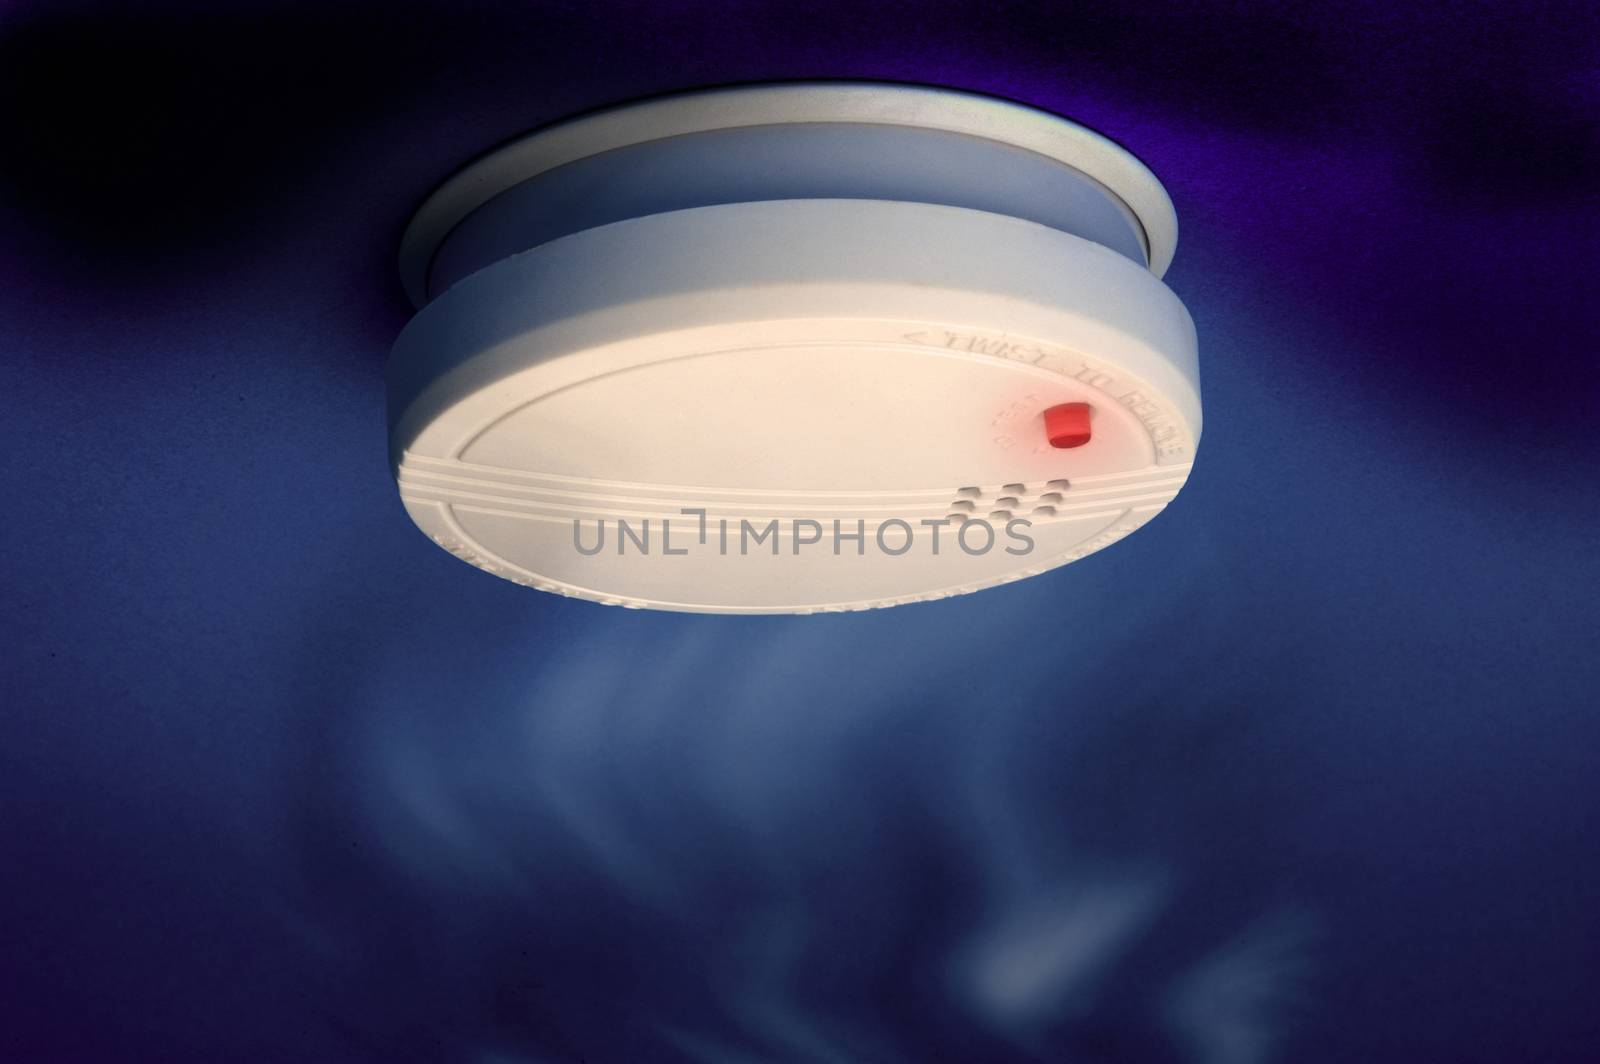 smoke detector by gillespaire